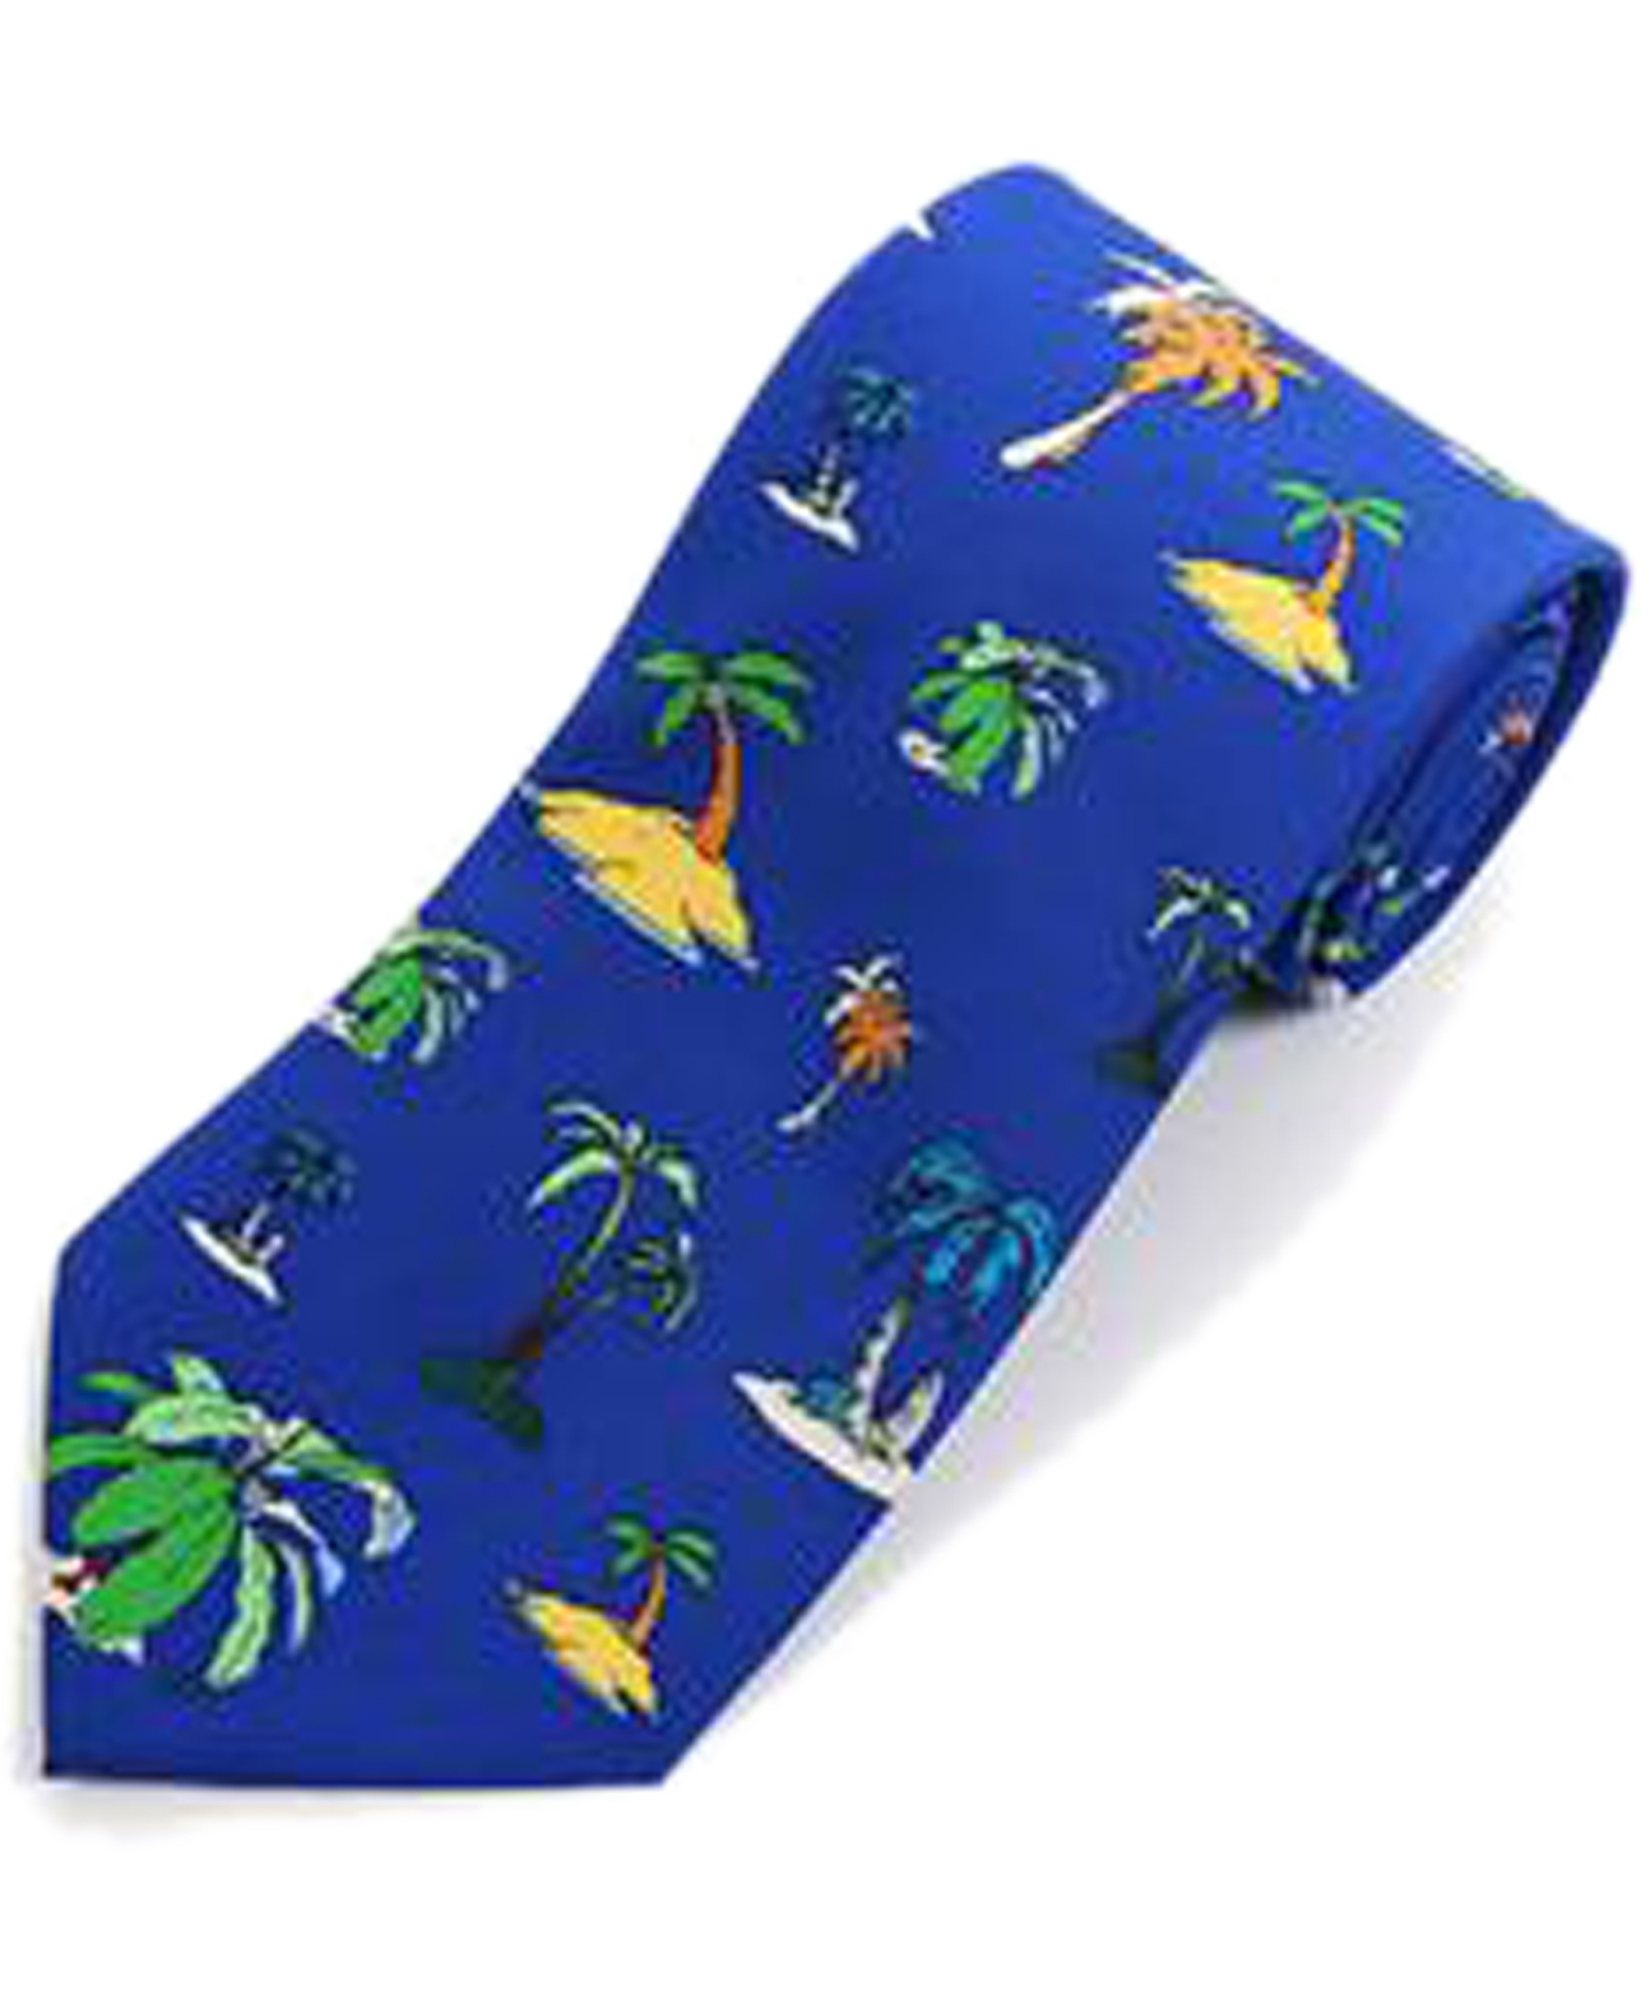 "Tropical" Novelty Tie